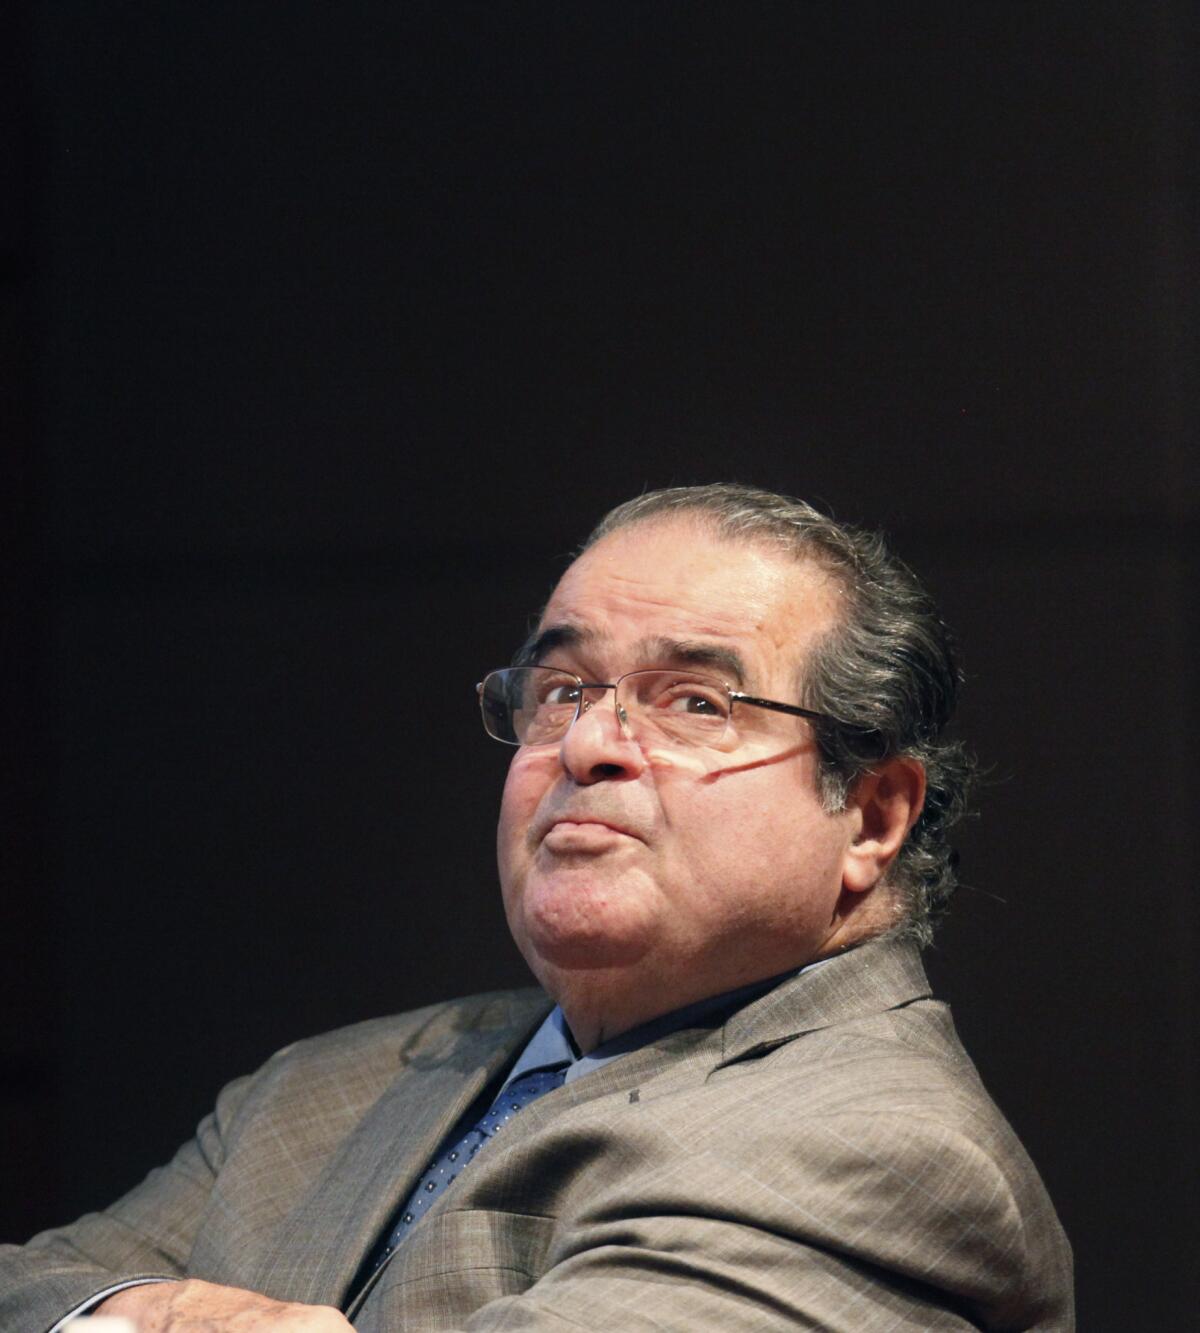 Supreme Court justice Antonin Scalia is seen before addressing the Chicago-Kent College Law justice in Chicago in 2011. On Monday, Scalia defended his legal writings that some find offensive and anti-gay.